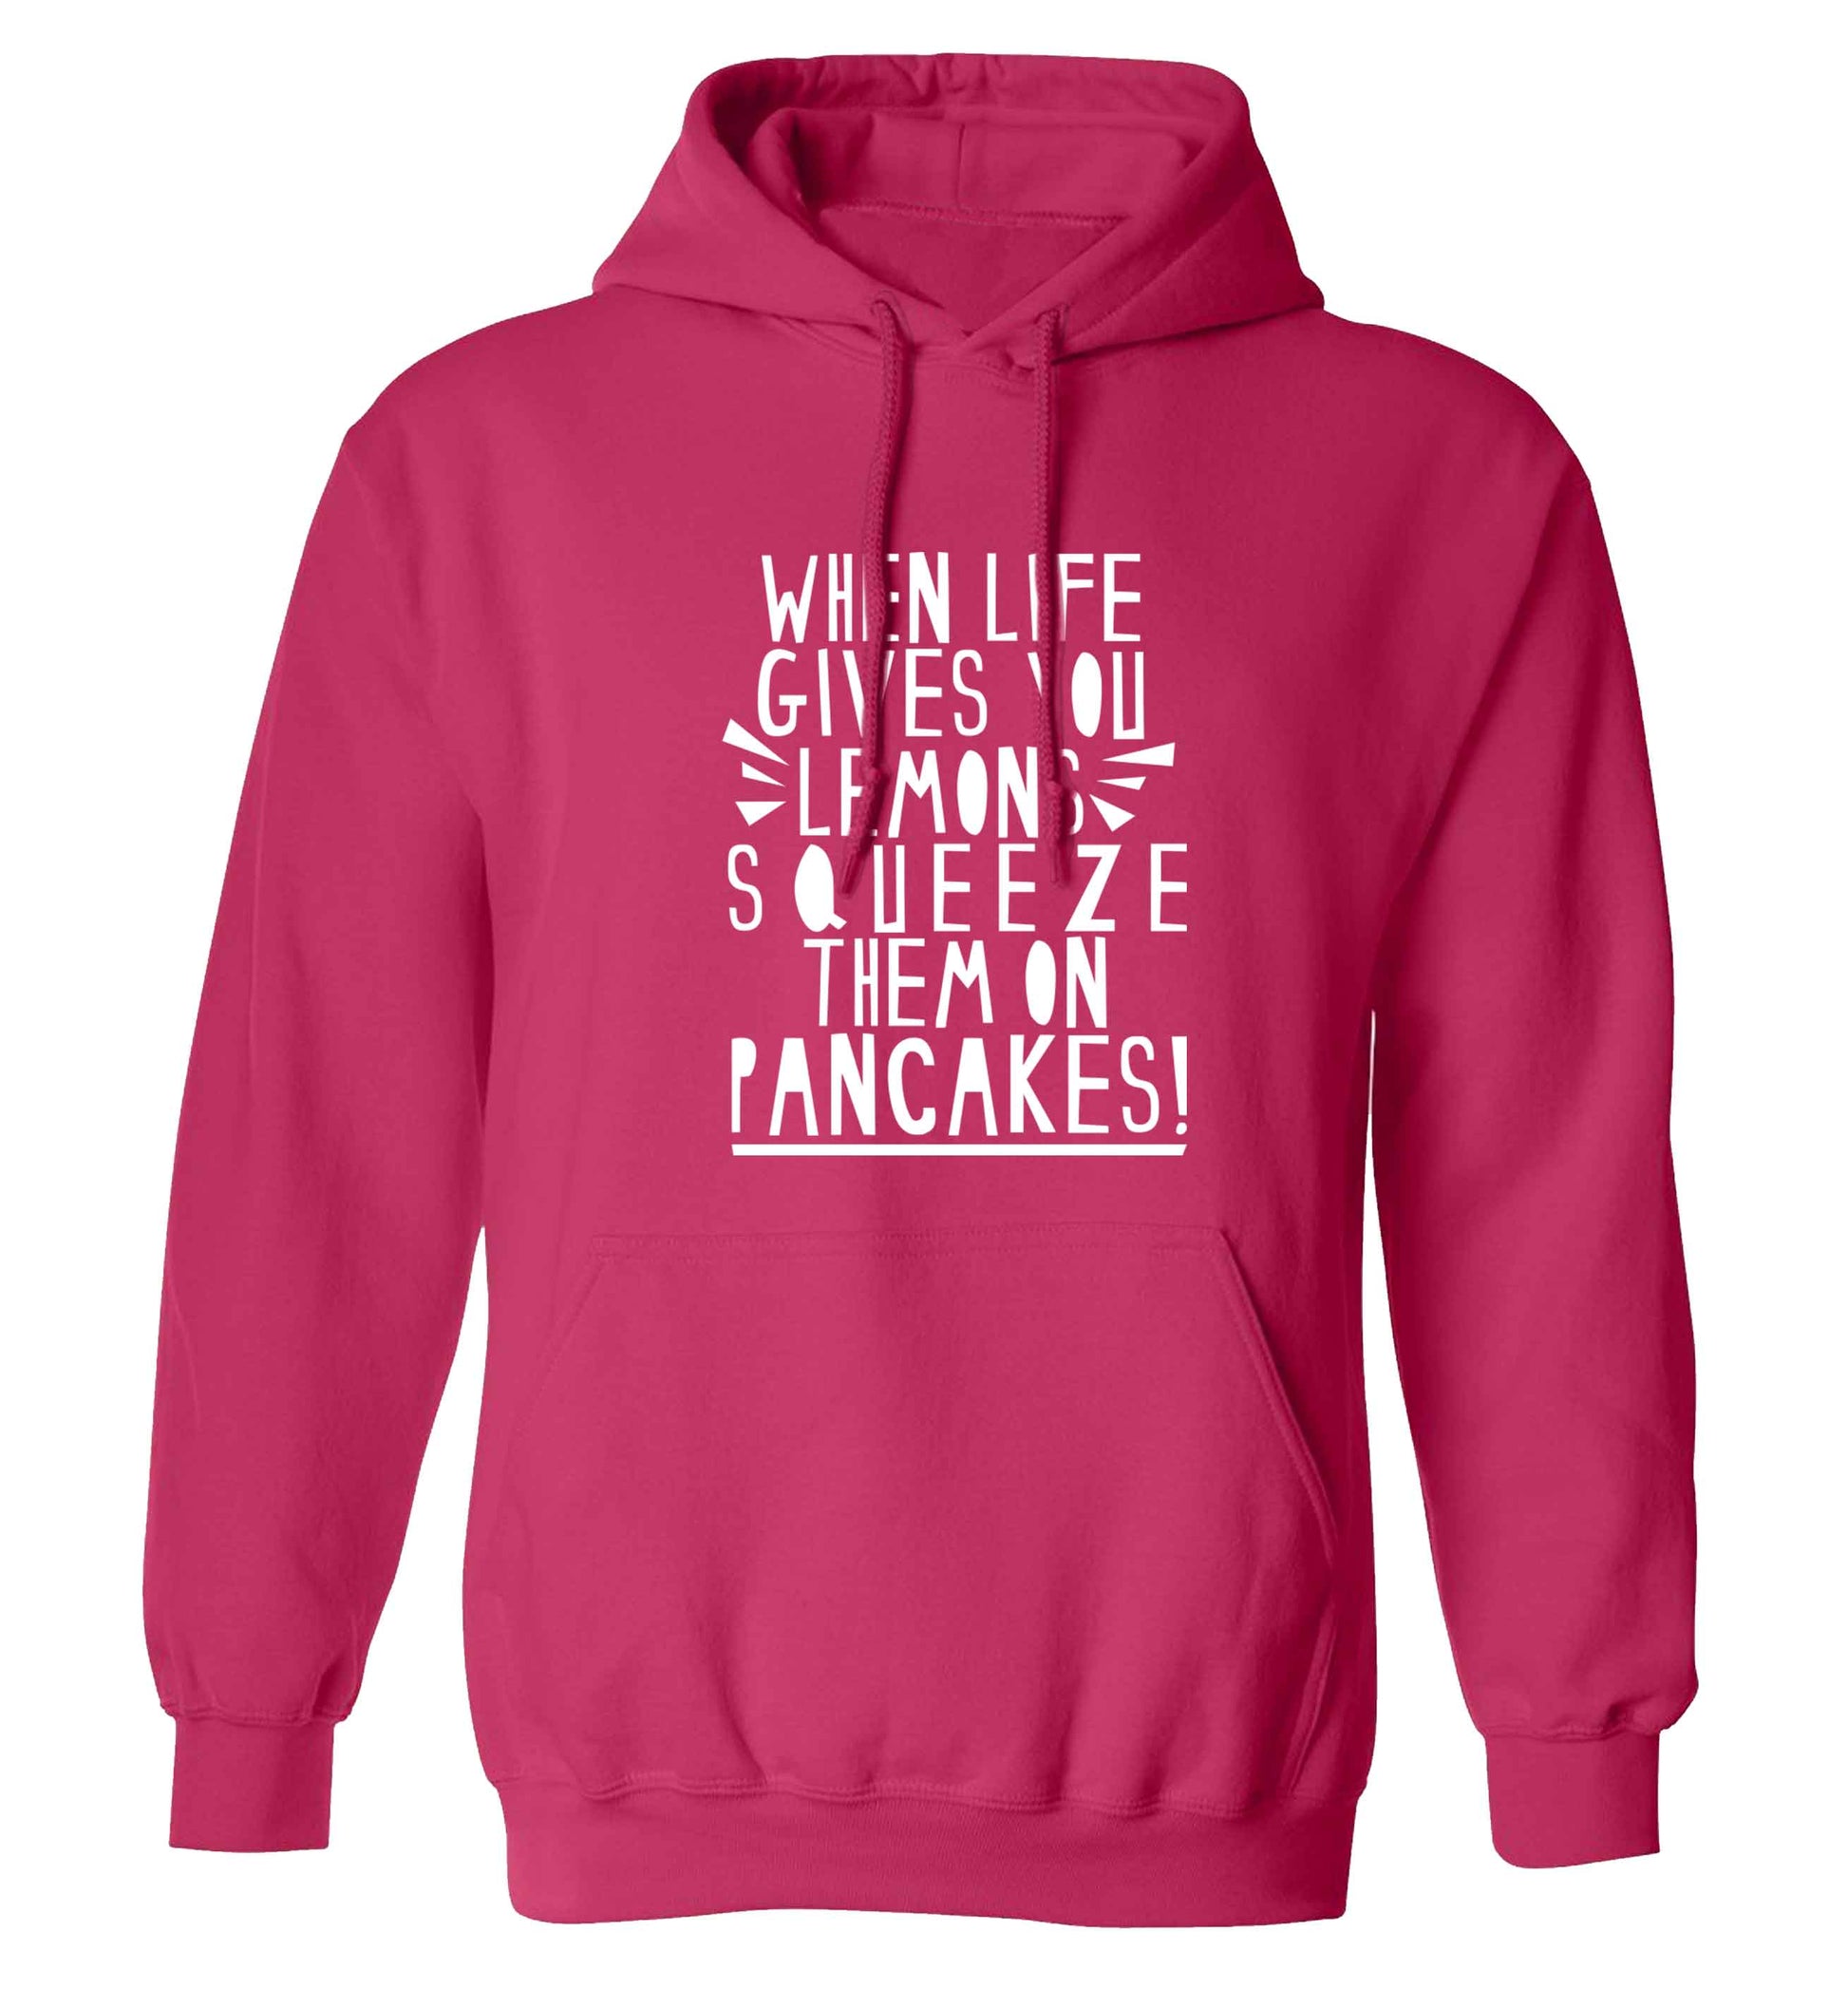 When life gives you lemons squeeze them on pancakes! adults unisex pink hoodie 2XL